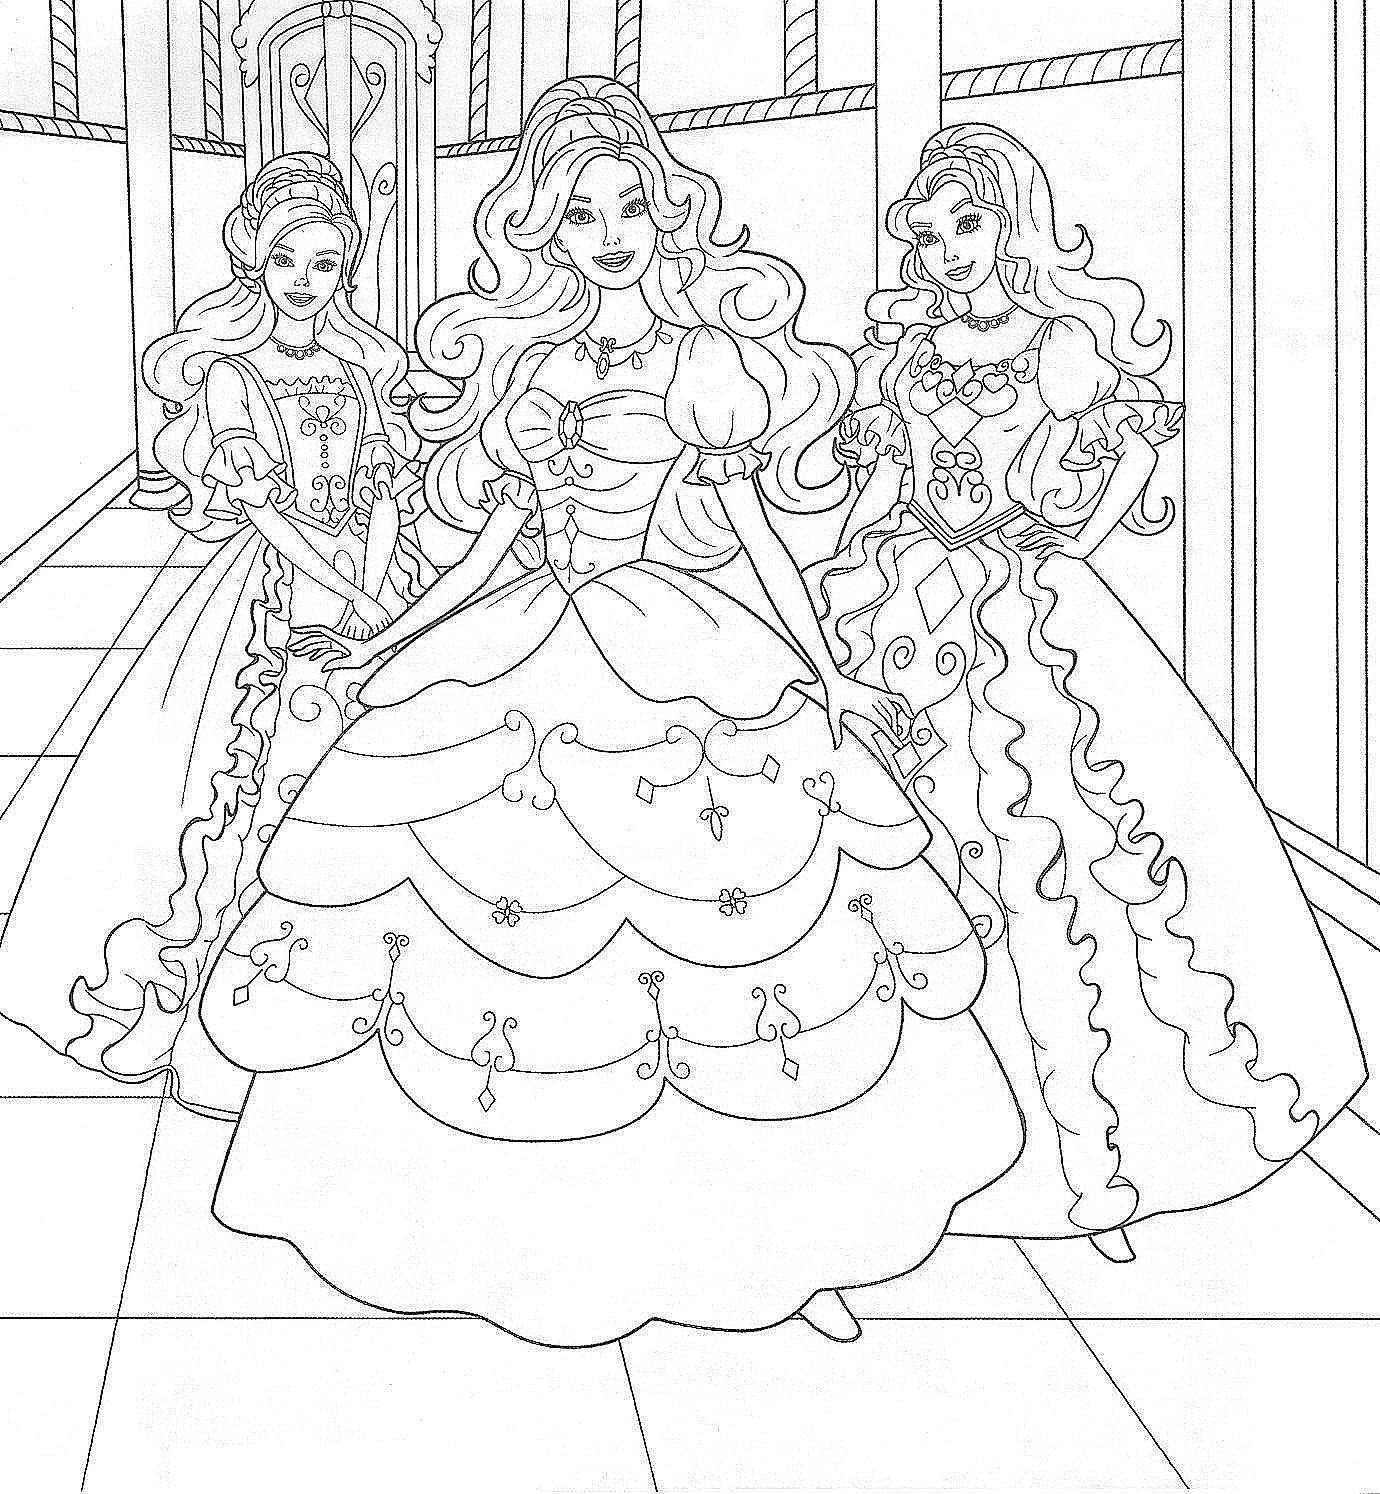 Coloring Ideas : Barbie Coloring Pages Girls Three Princess1 - Free Printable Barbie Coloring Pages